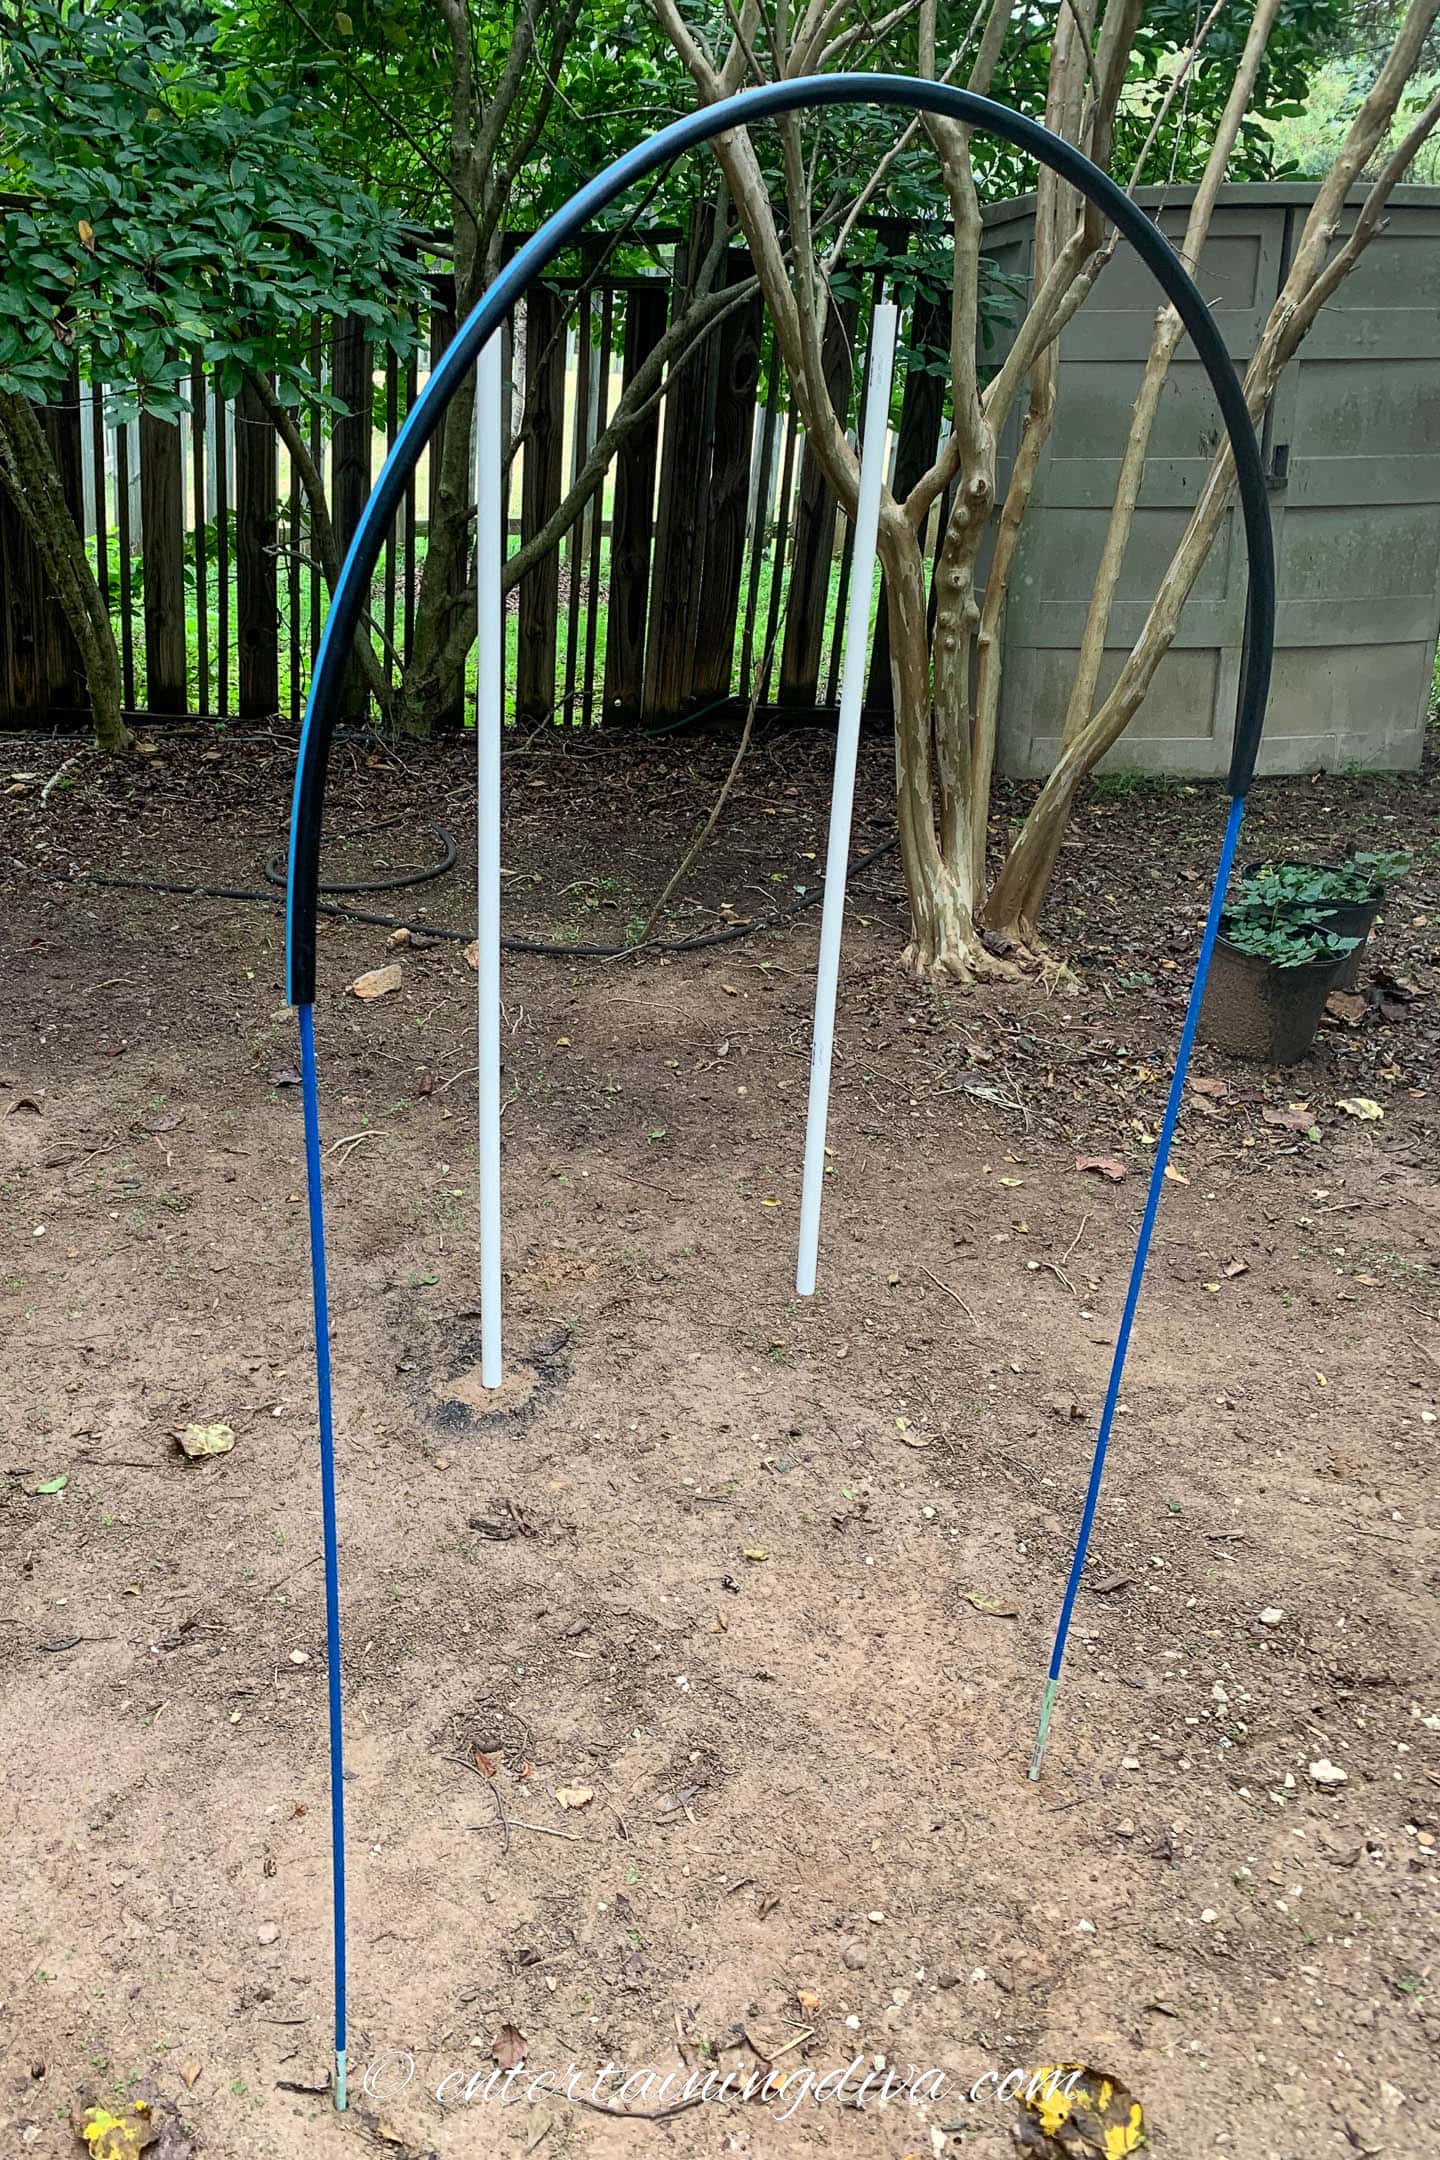 Flexible plumbing tube fitted in an arch over two garden stakes